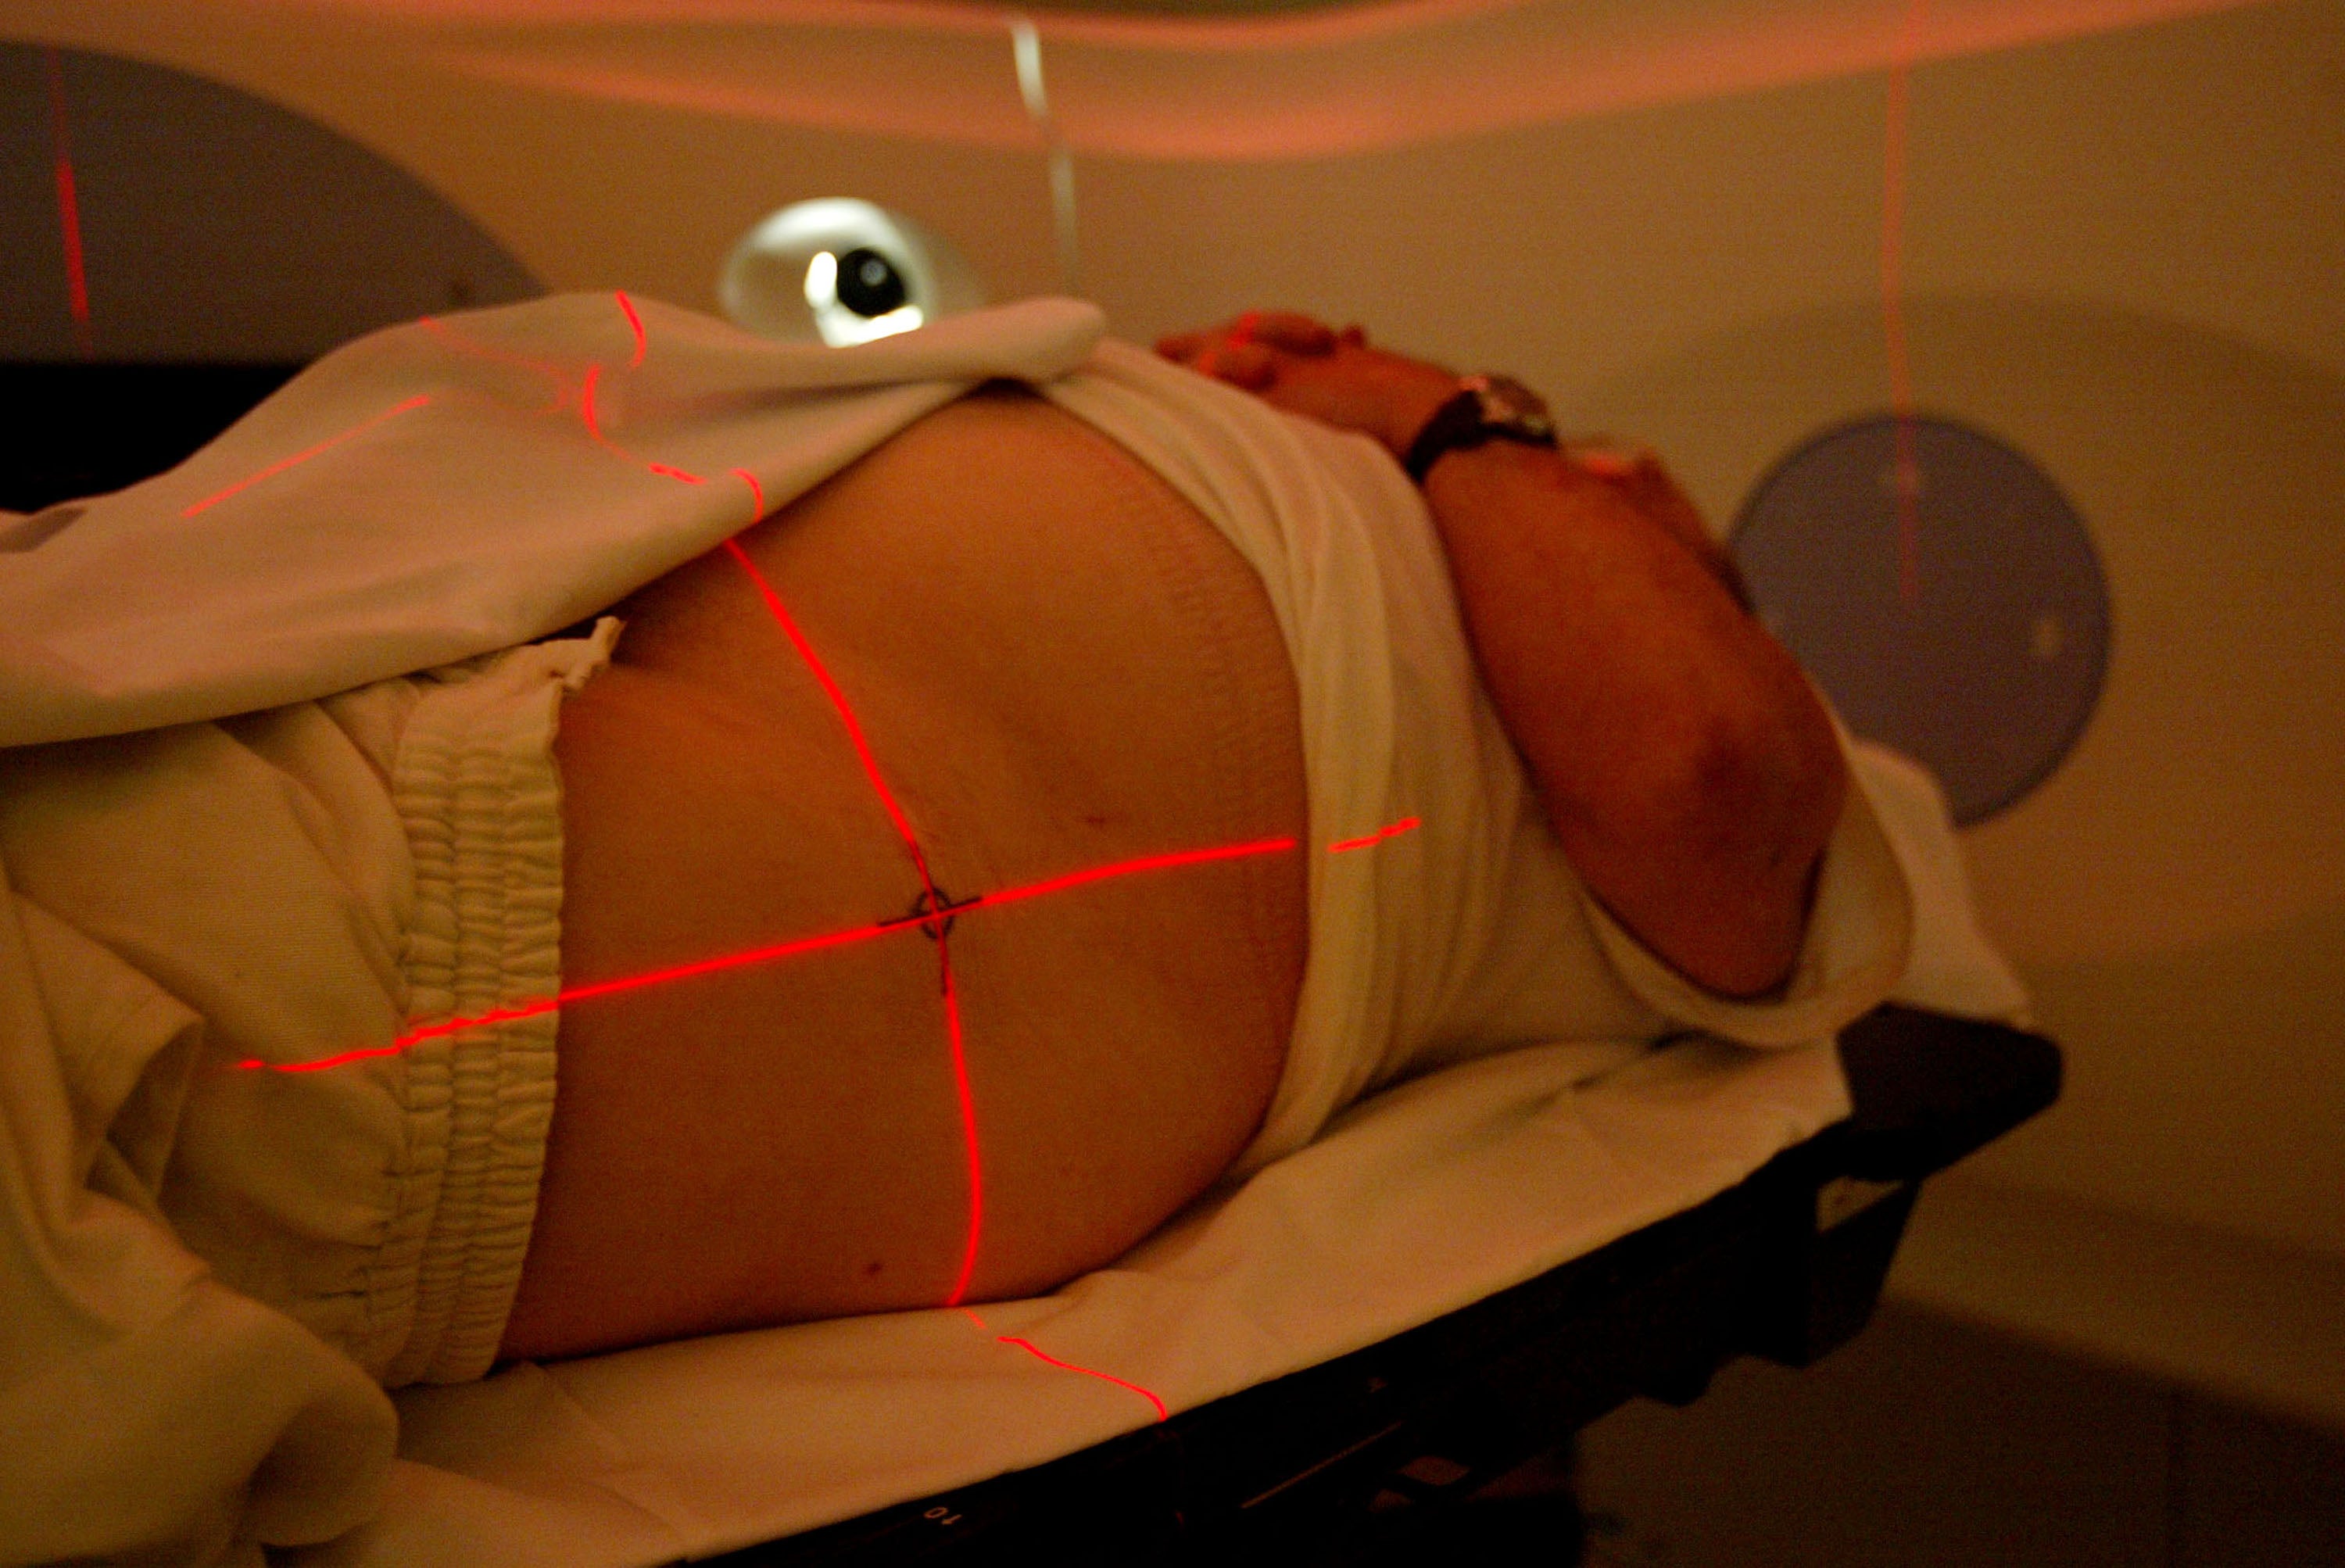 Lasers are pinpointed on a patient with prostate cancer at the radiation oncology centre at Cape Fear Valley Medical Centre in Fayetteville, North Carolina